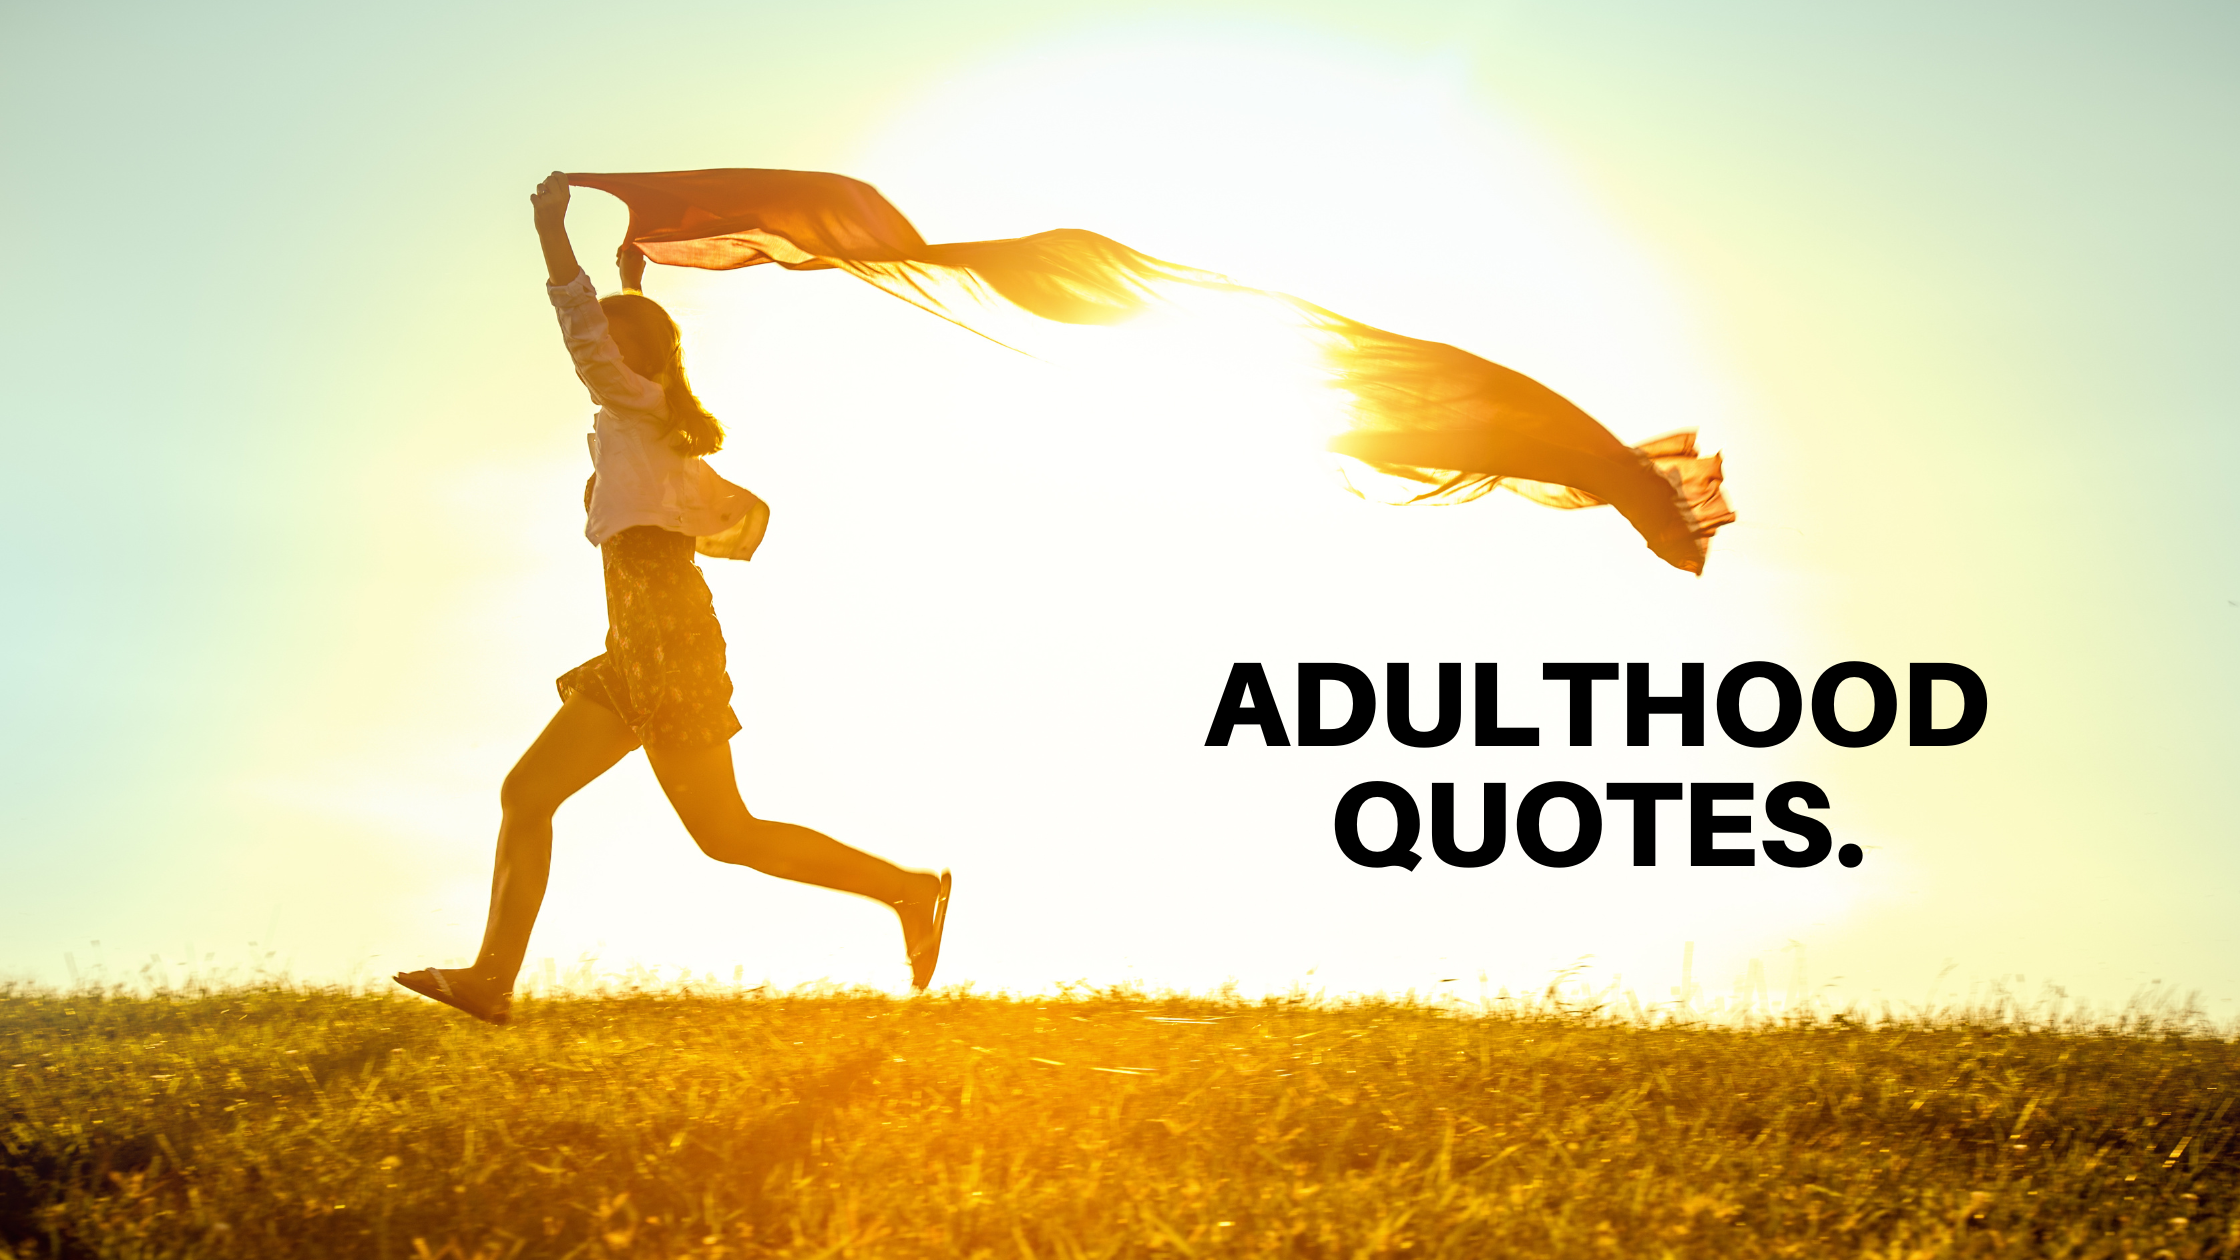 Adulthood Quotes.